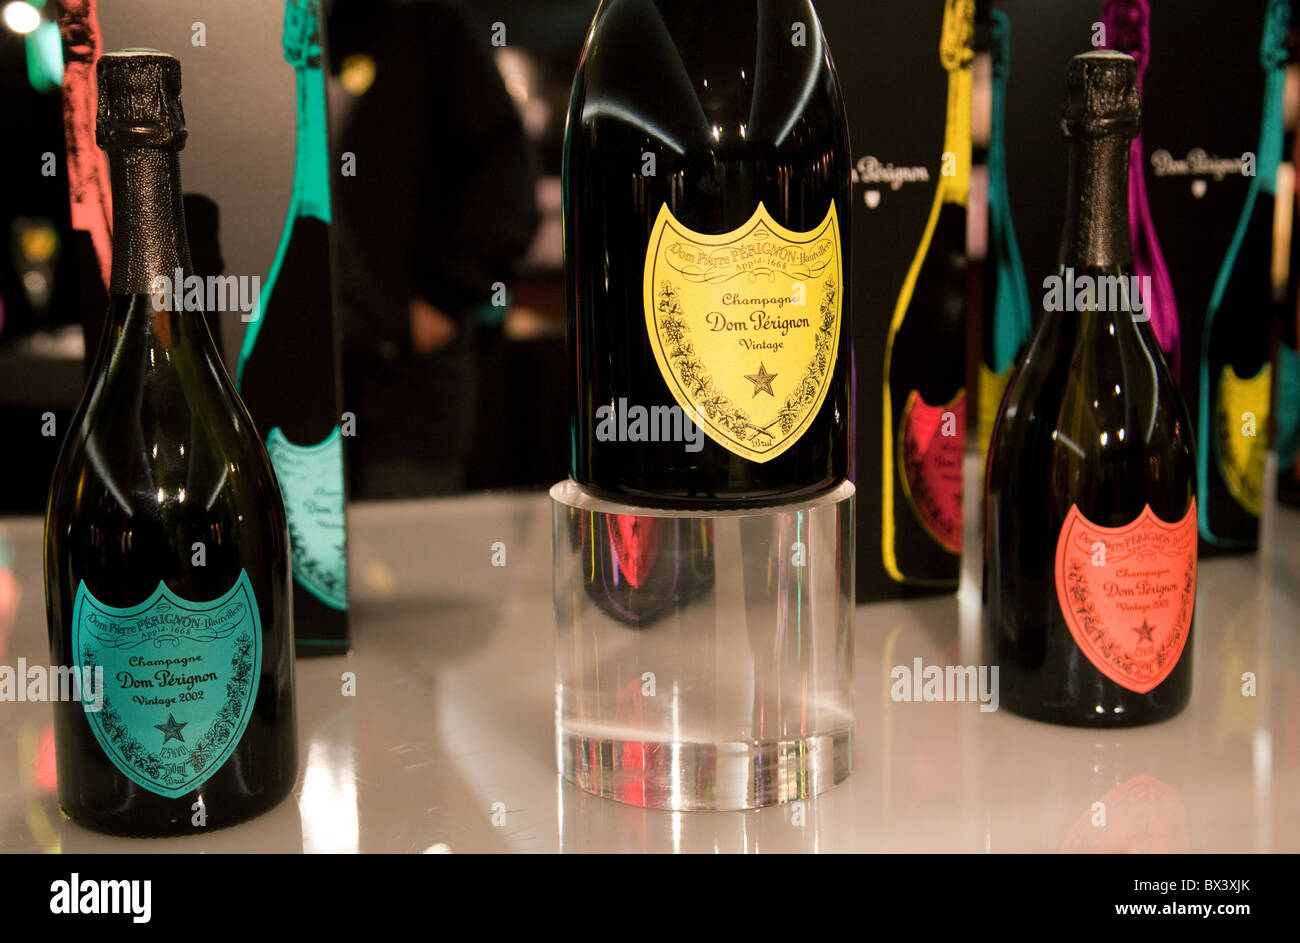 Moet & Chandon Rotating Champagne Cooler for Louis Vuitton